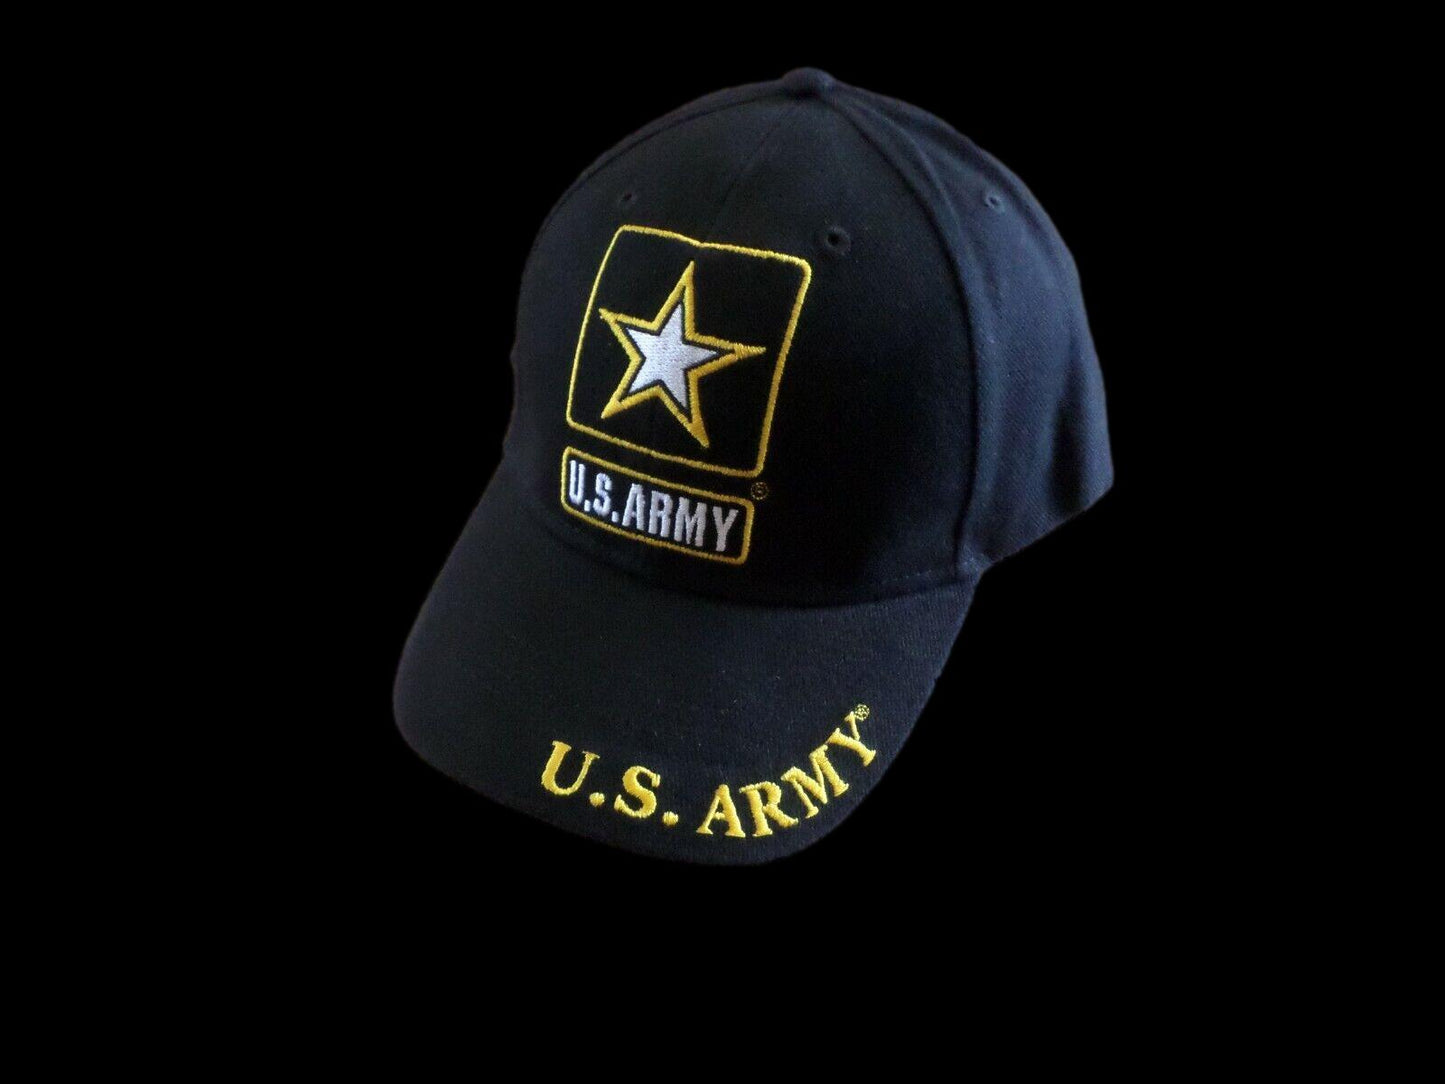 U.S ARMY STAR LOGO HAT CAP OFFICIAL LICENSED PRODUCT